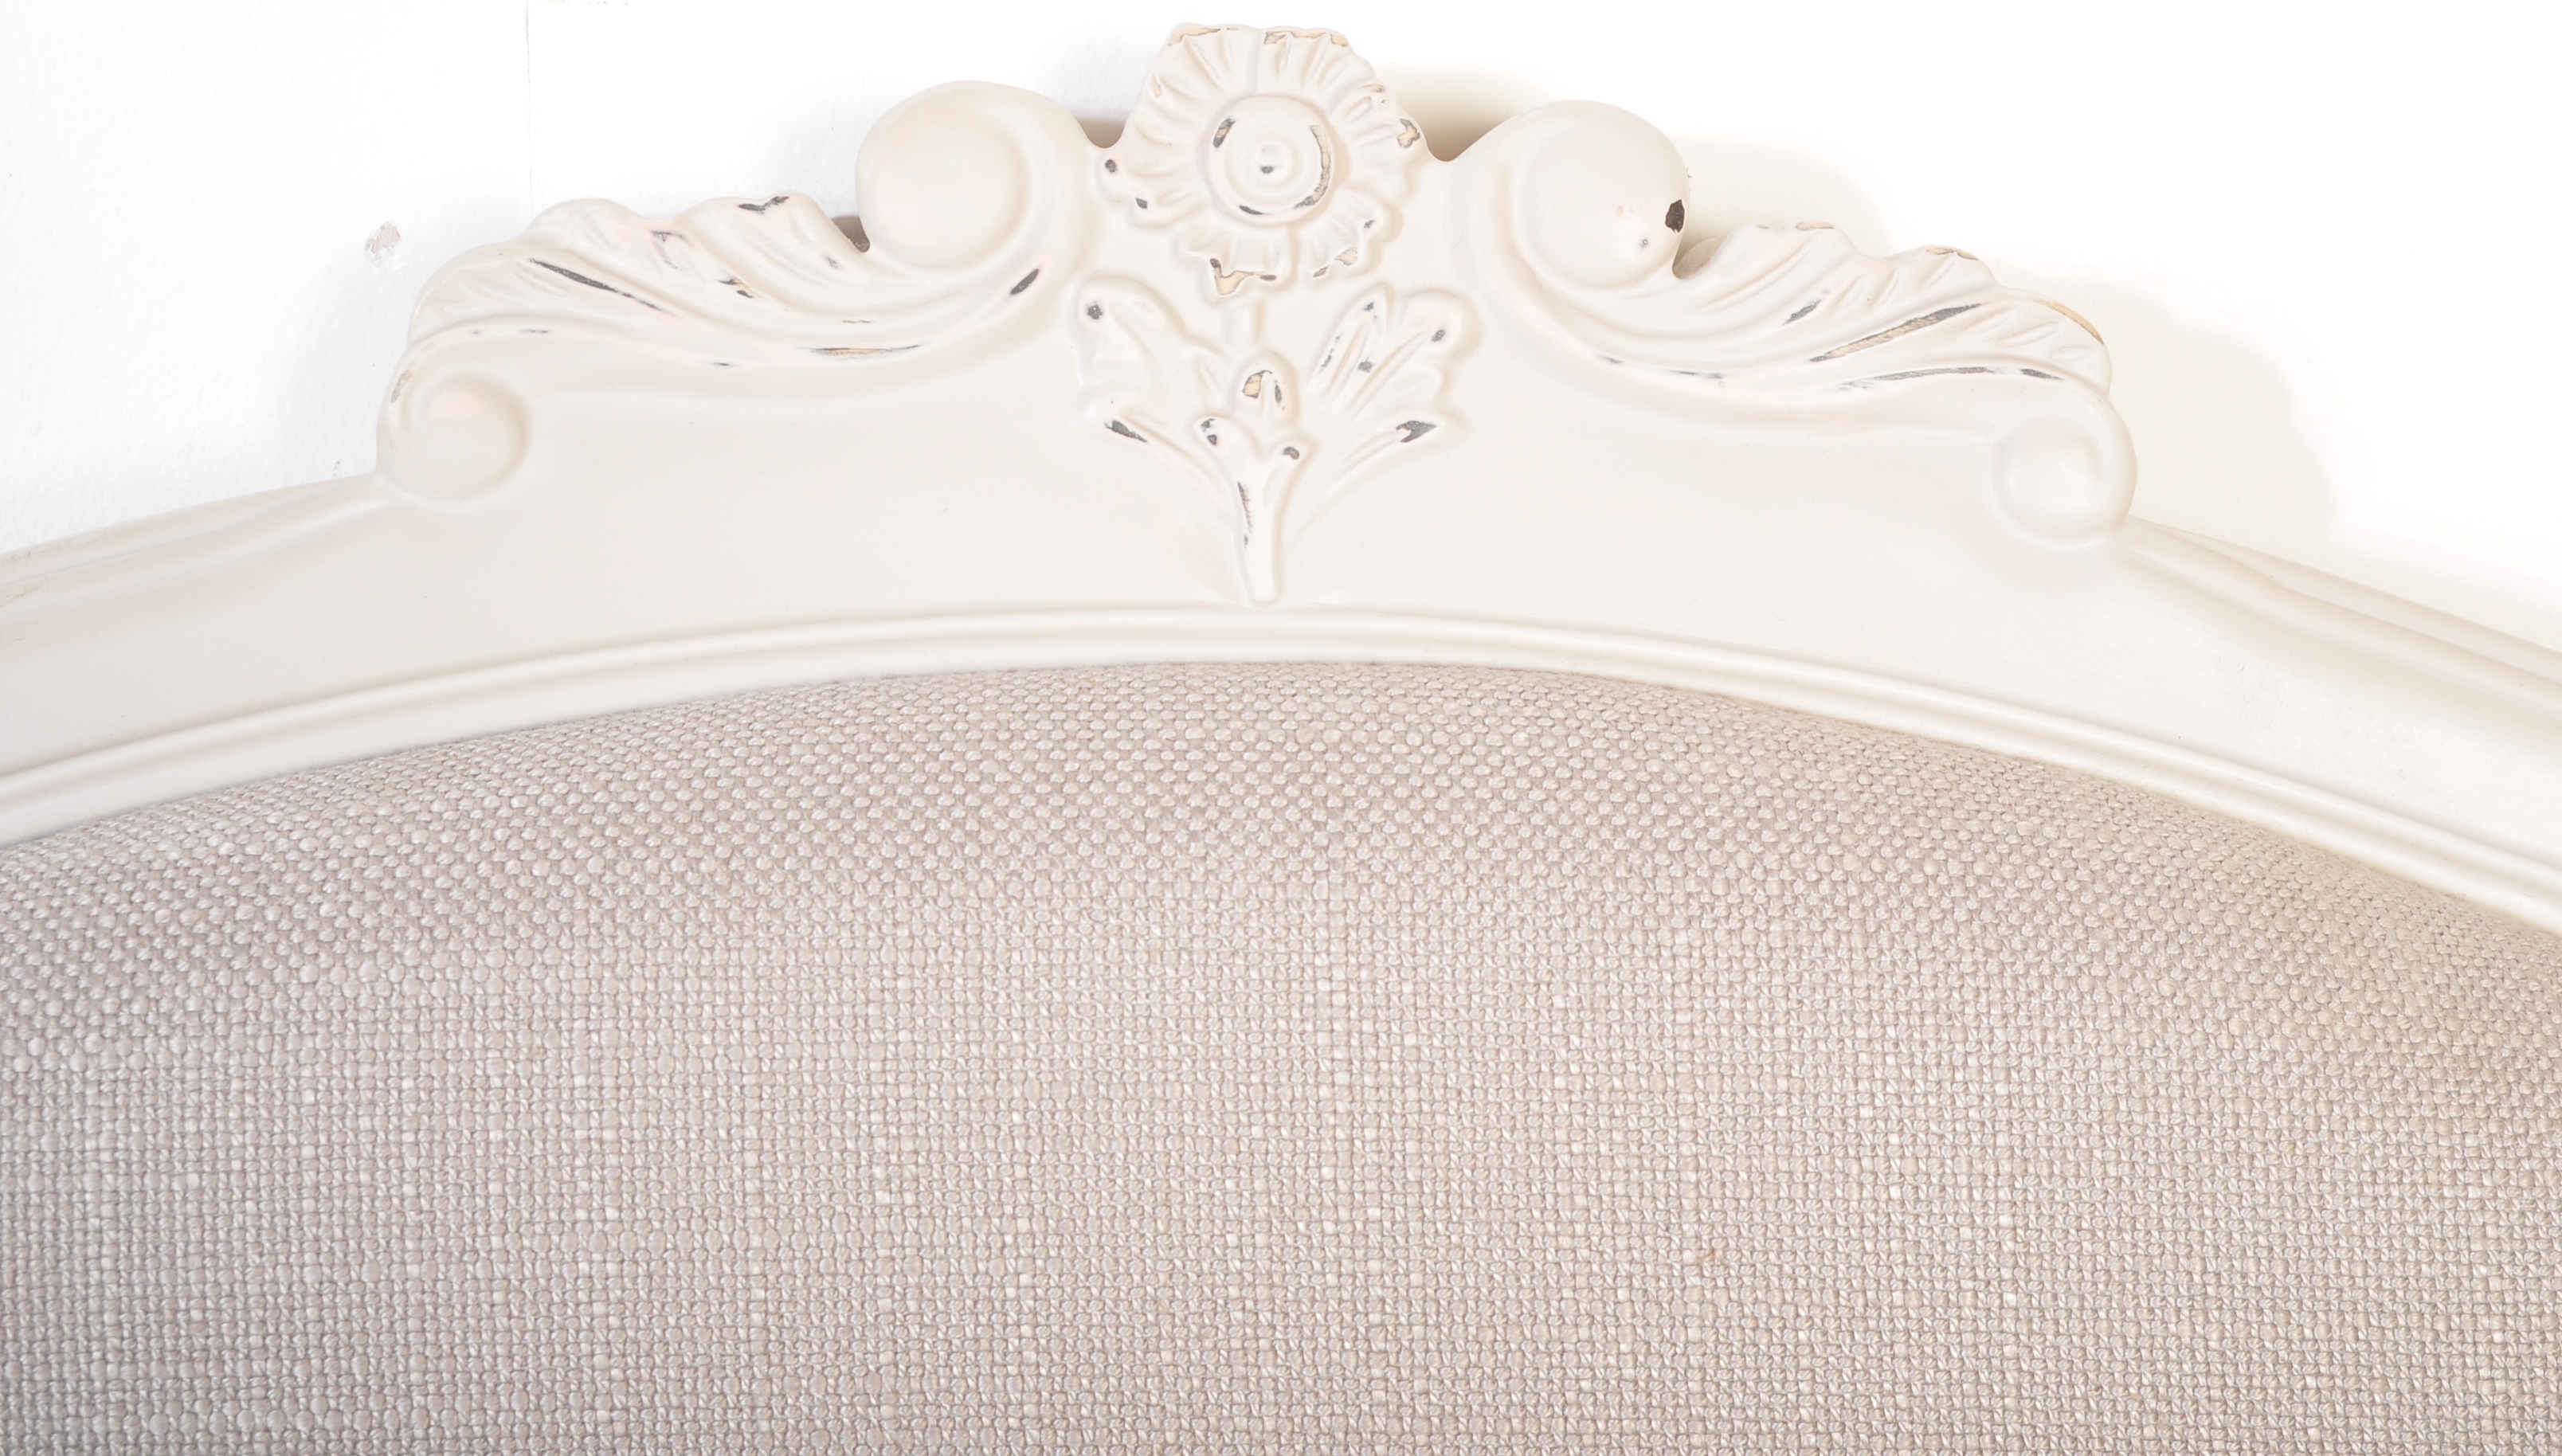 CONTEMPORARY LAURA ASHLEY TYPE FRENCH CORBEILLE BED - Image 6 of 10